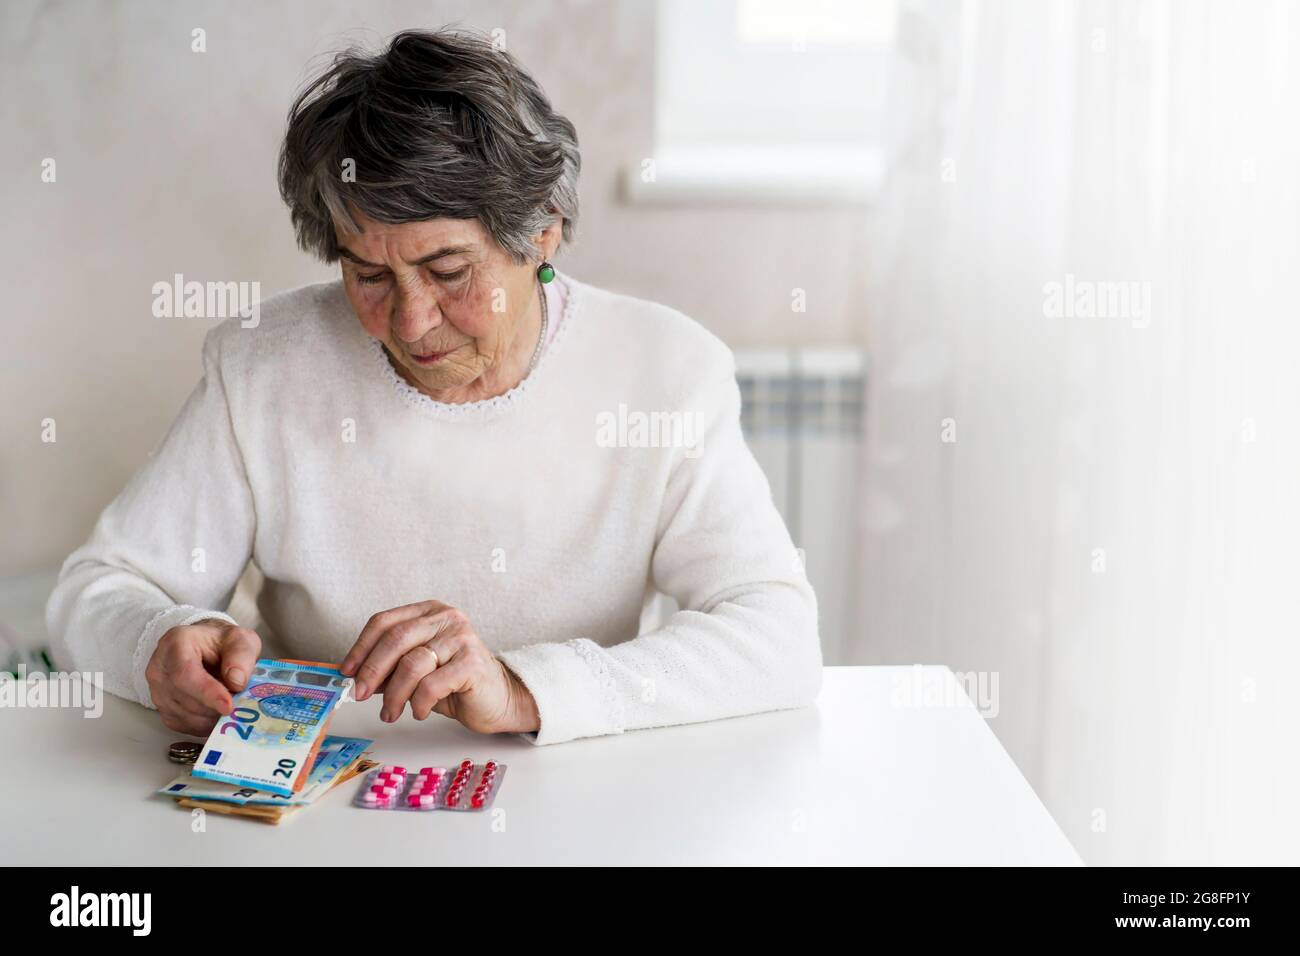 An old lady in a white sweater is planning her budget. Stock Photo